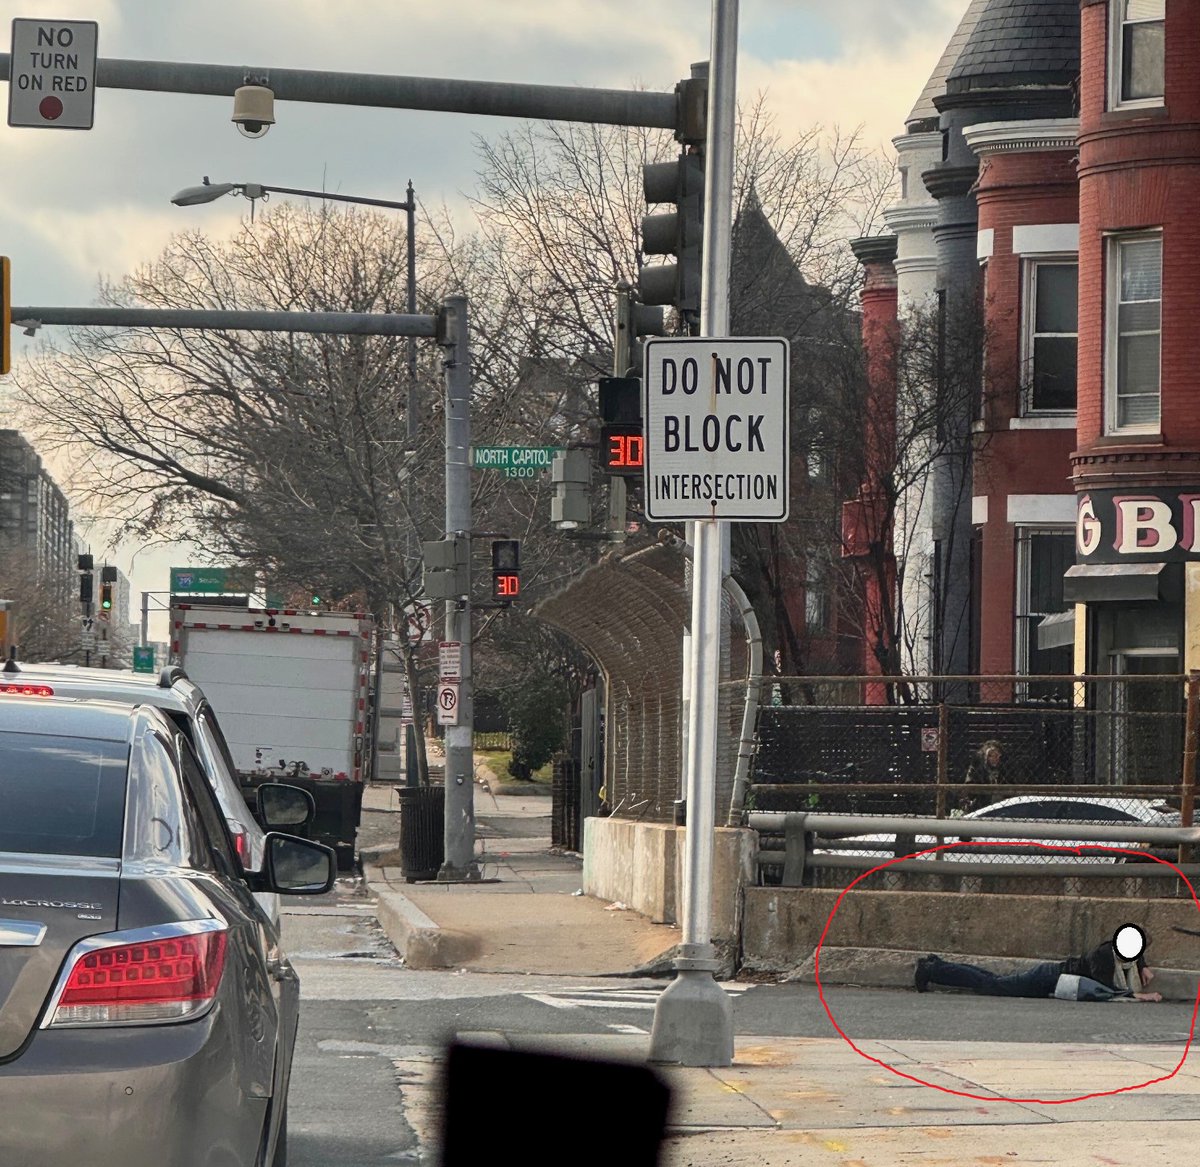 SHOOTOUT ON NORTH CAPITOL ST-- at New York Ave. Two persons reportedly stepped out of an auto and opened fire. Police have found ~36 shell casings so far. People dove for cover (see photo).  nobody found shot, yet, but there is damage to a residence on N St NW